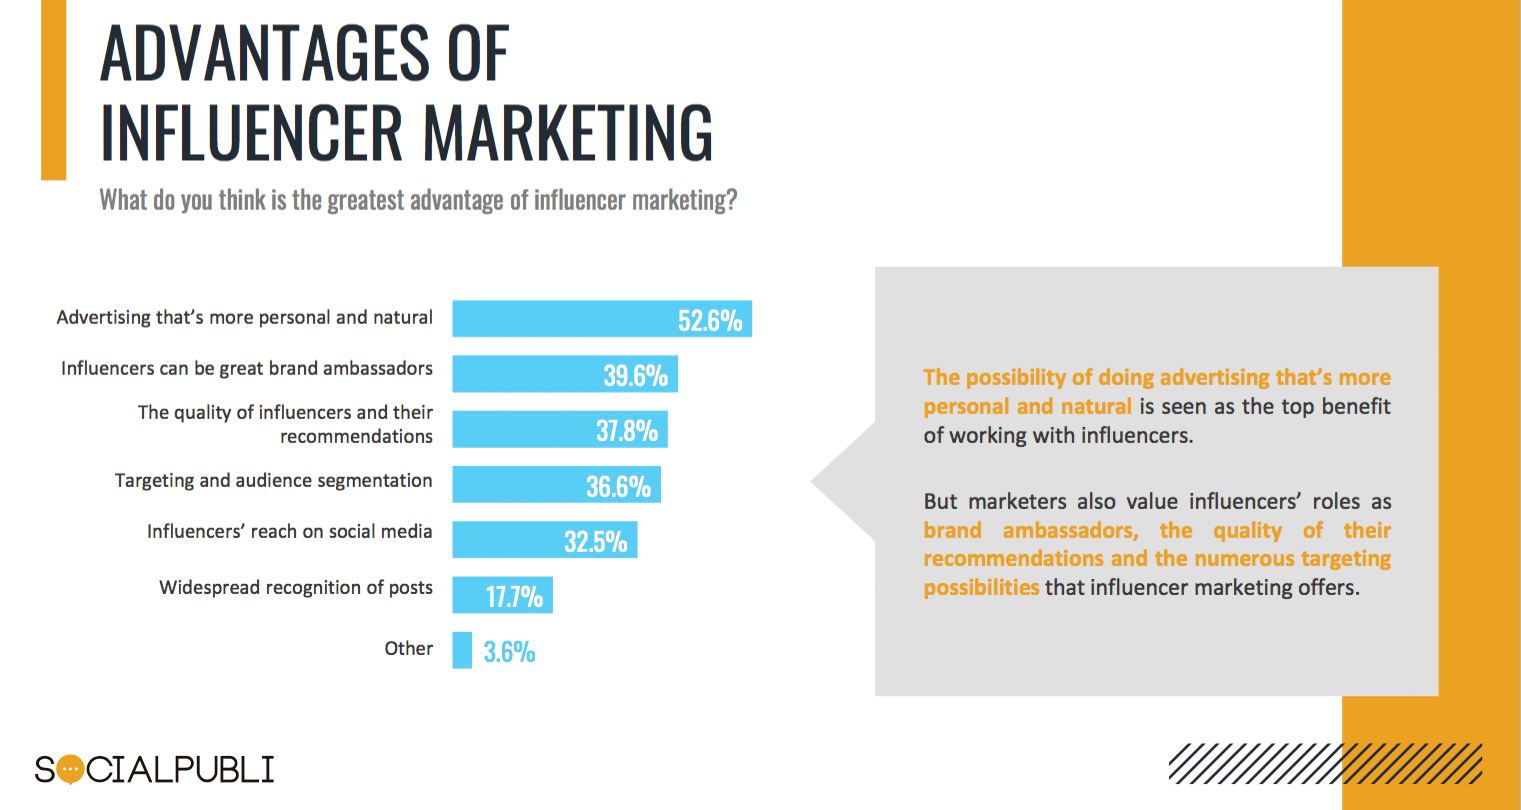 Influencer marketing remains a go-to COVID strategy—9 in 10 marketers seeing big results